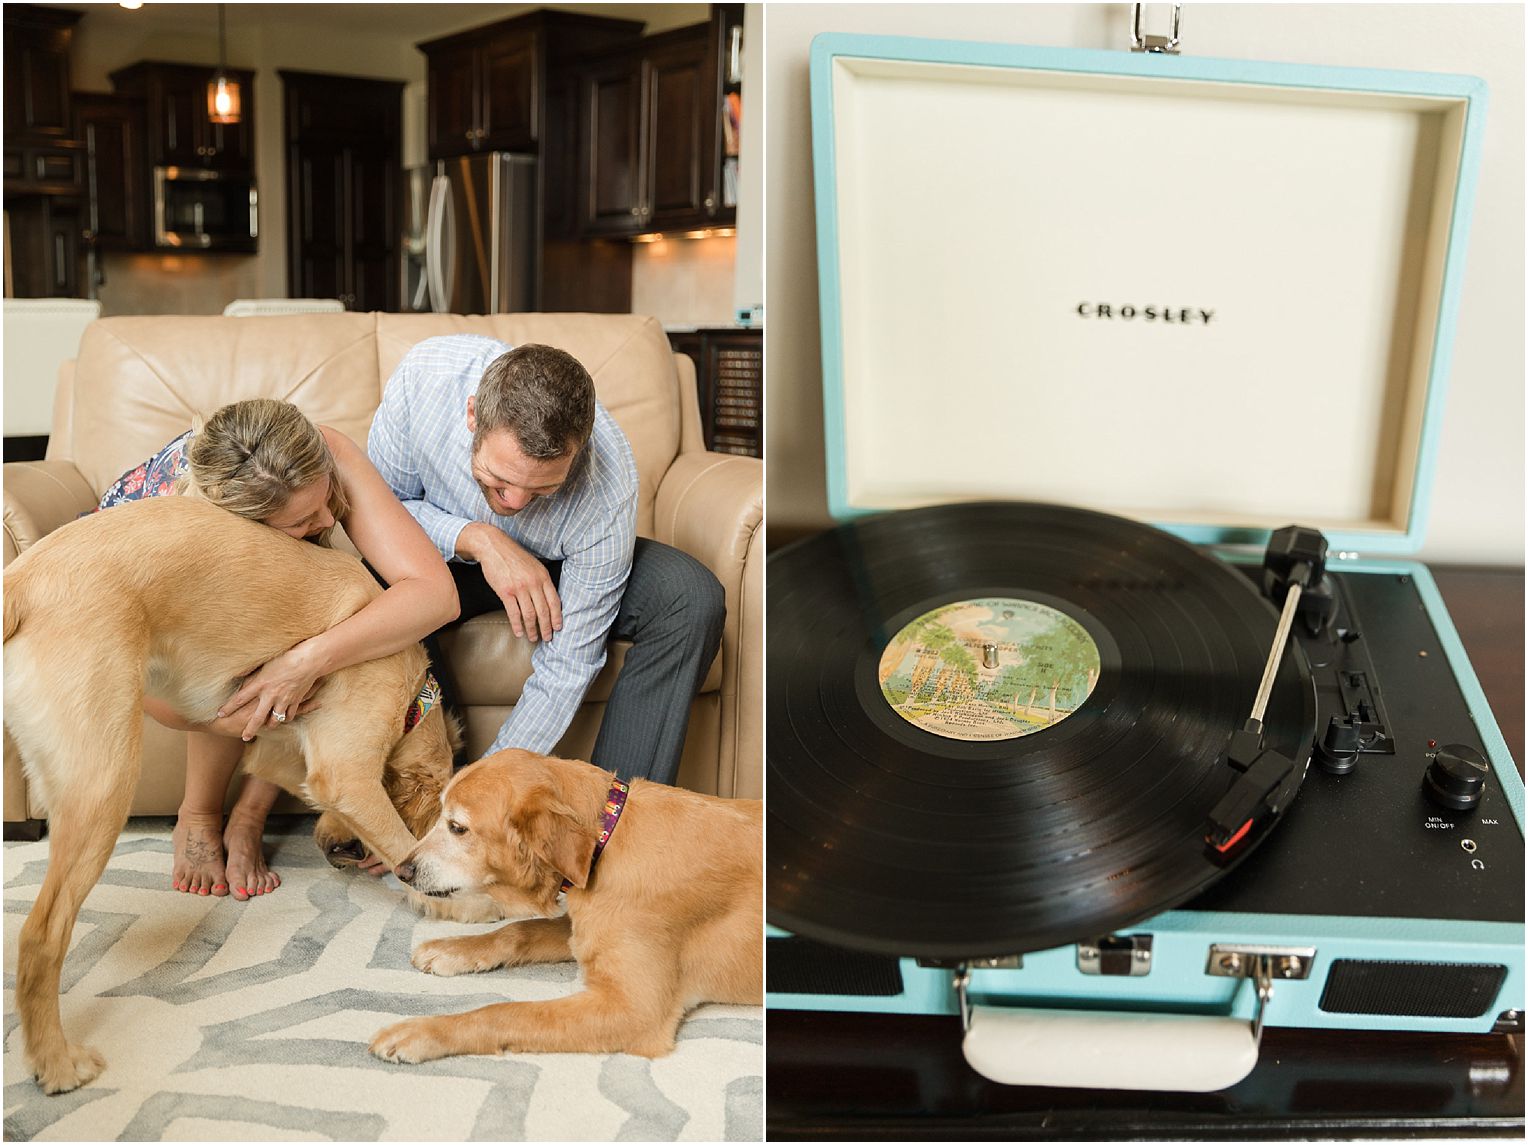 Kansas City Engagement Photos - In home lifestyle session with dogs